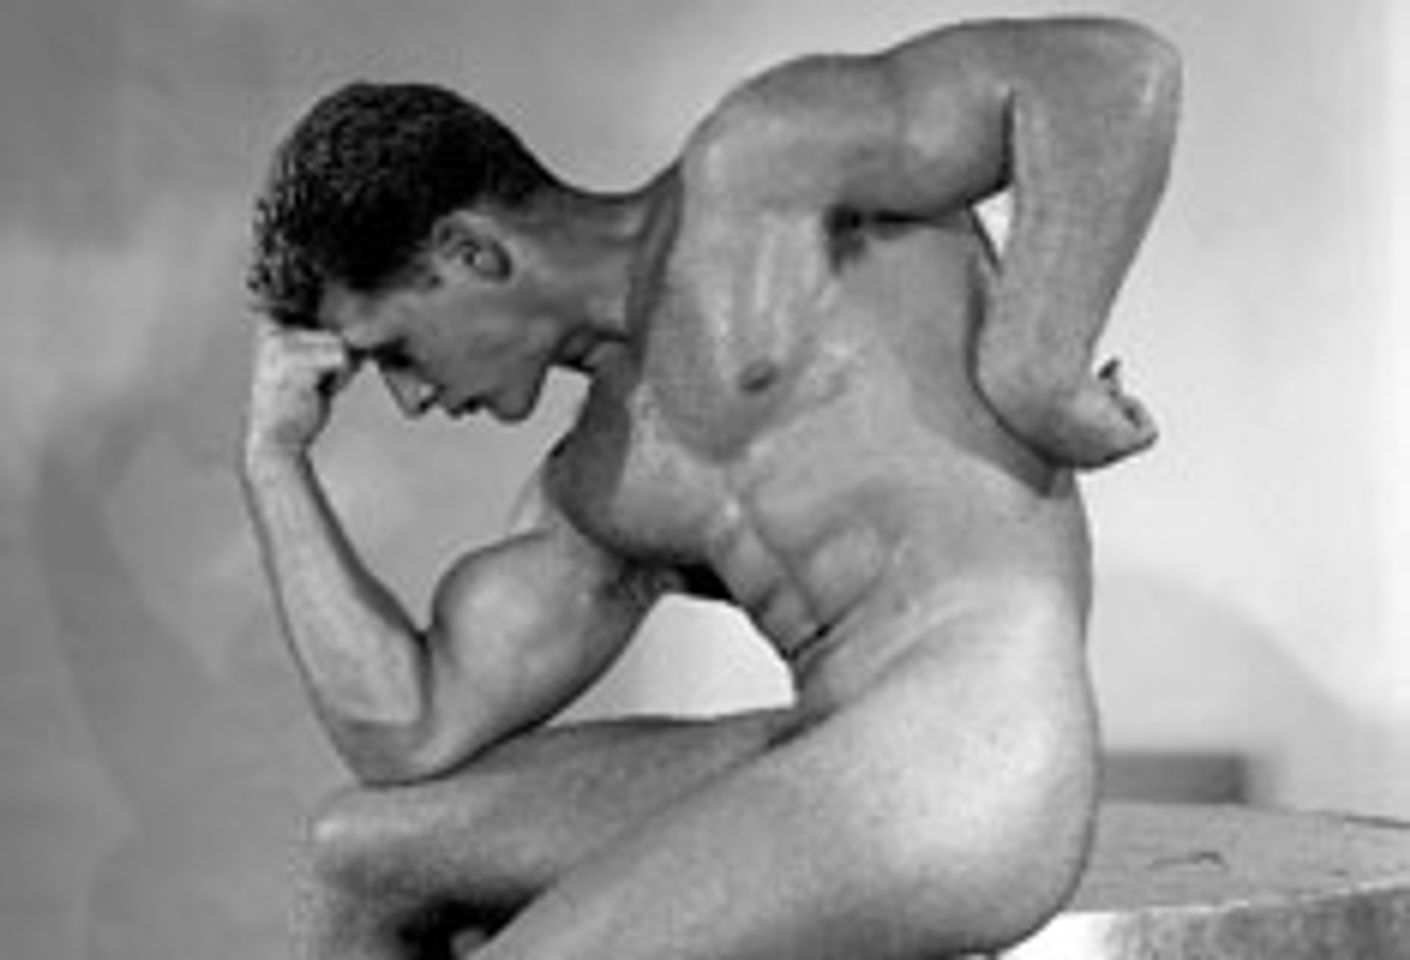 Sale of Historic Male-Physique Photo and Film Collection Guarantees Preservation